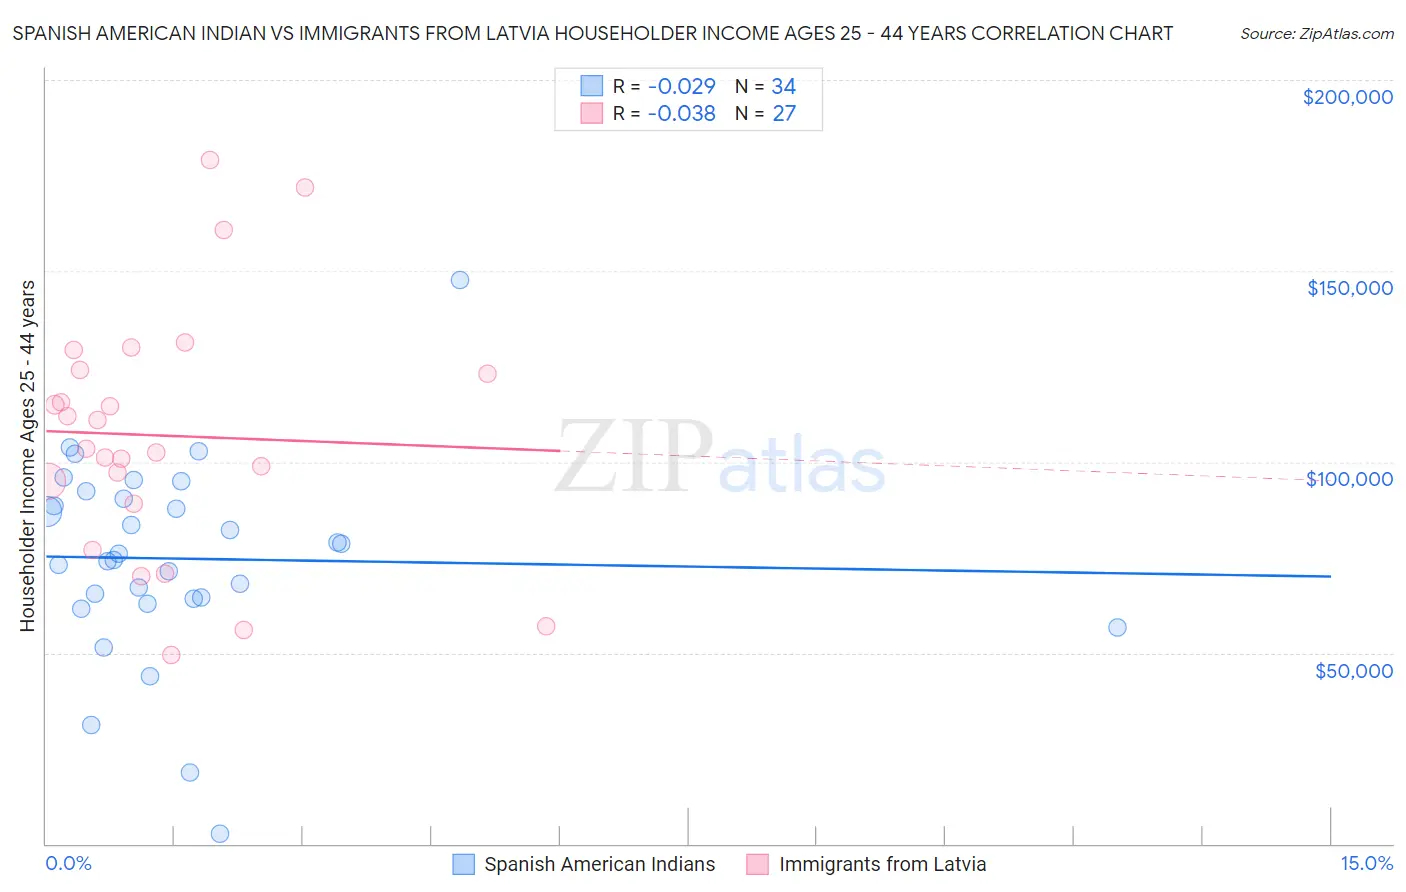 Spanish American Indian vs Immigrants from Latvia Householder Income Ages 25 - 44 years